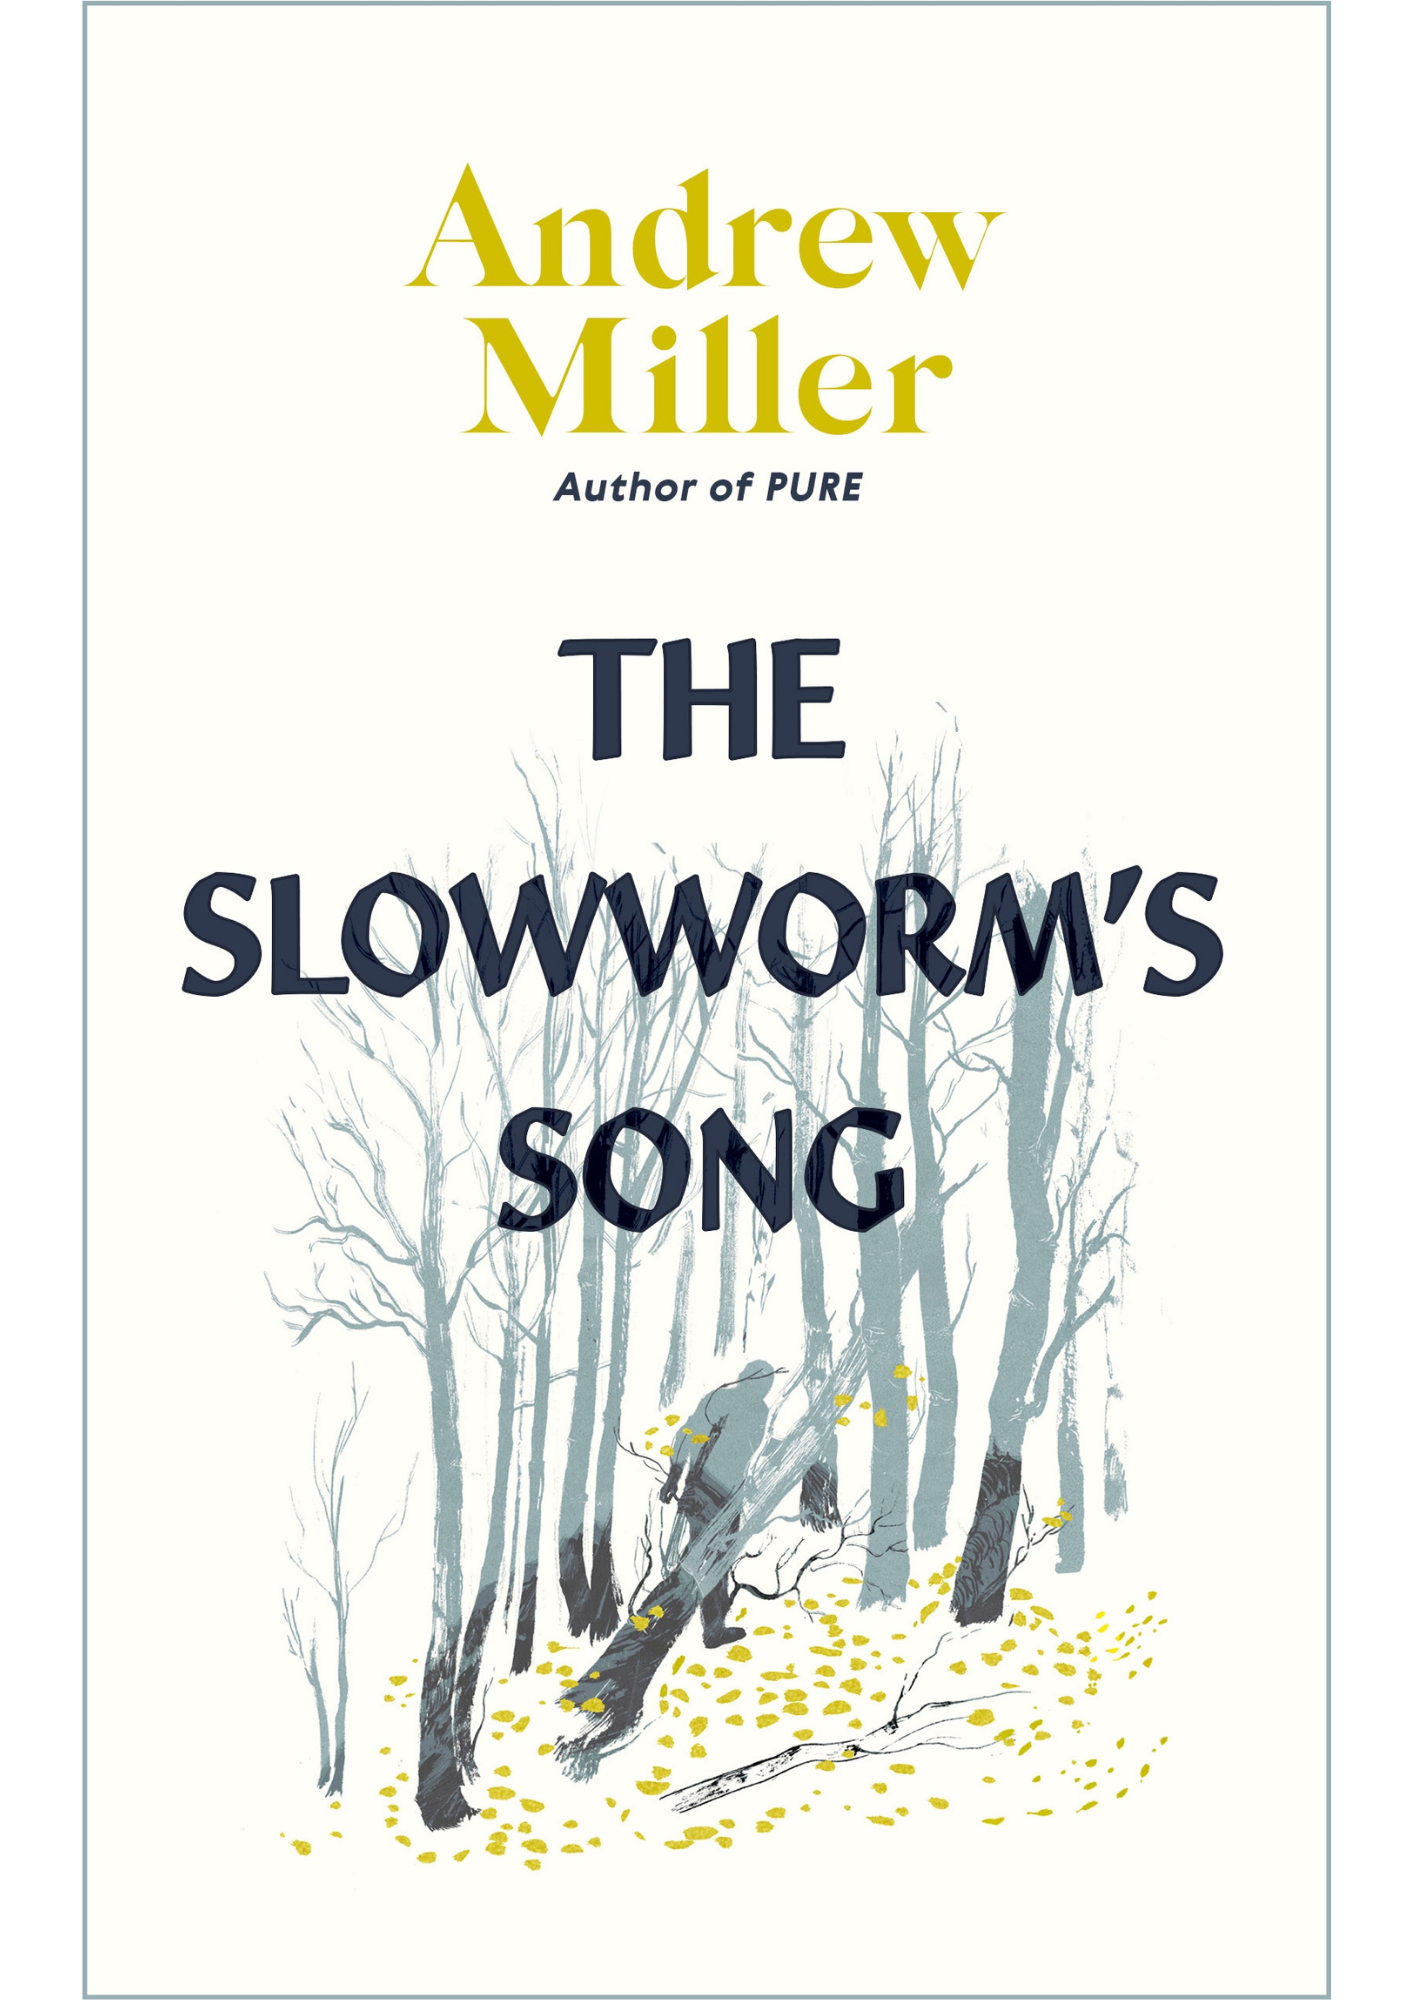 Frome Lit Fest: The Slowworm’s Song with Andrew Miller